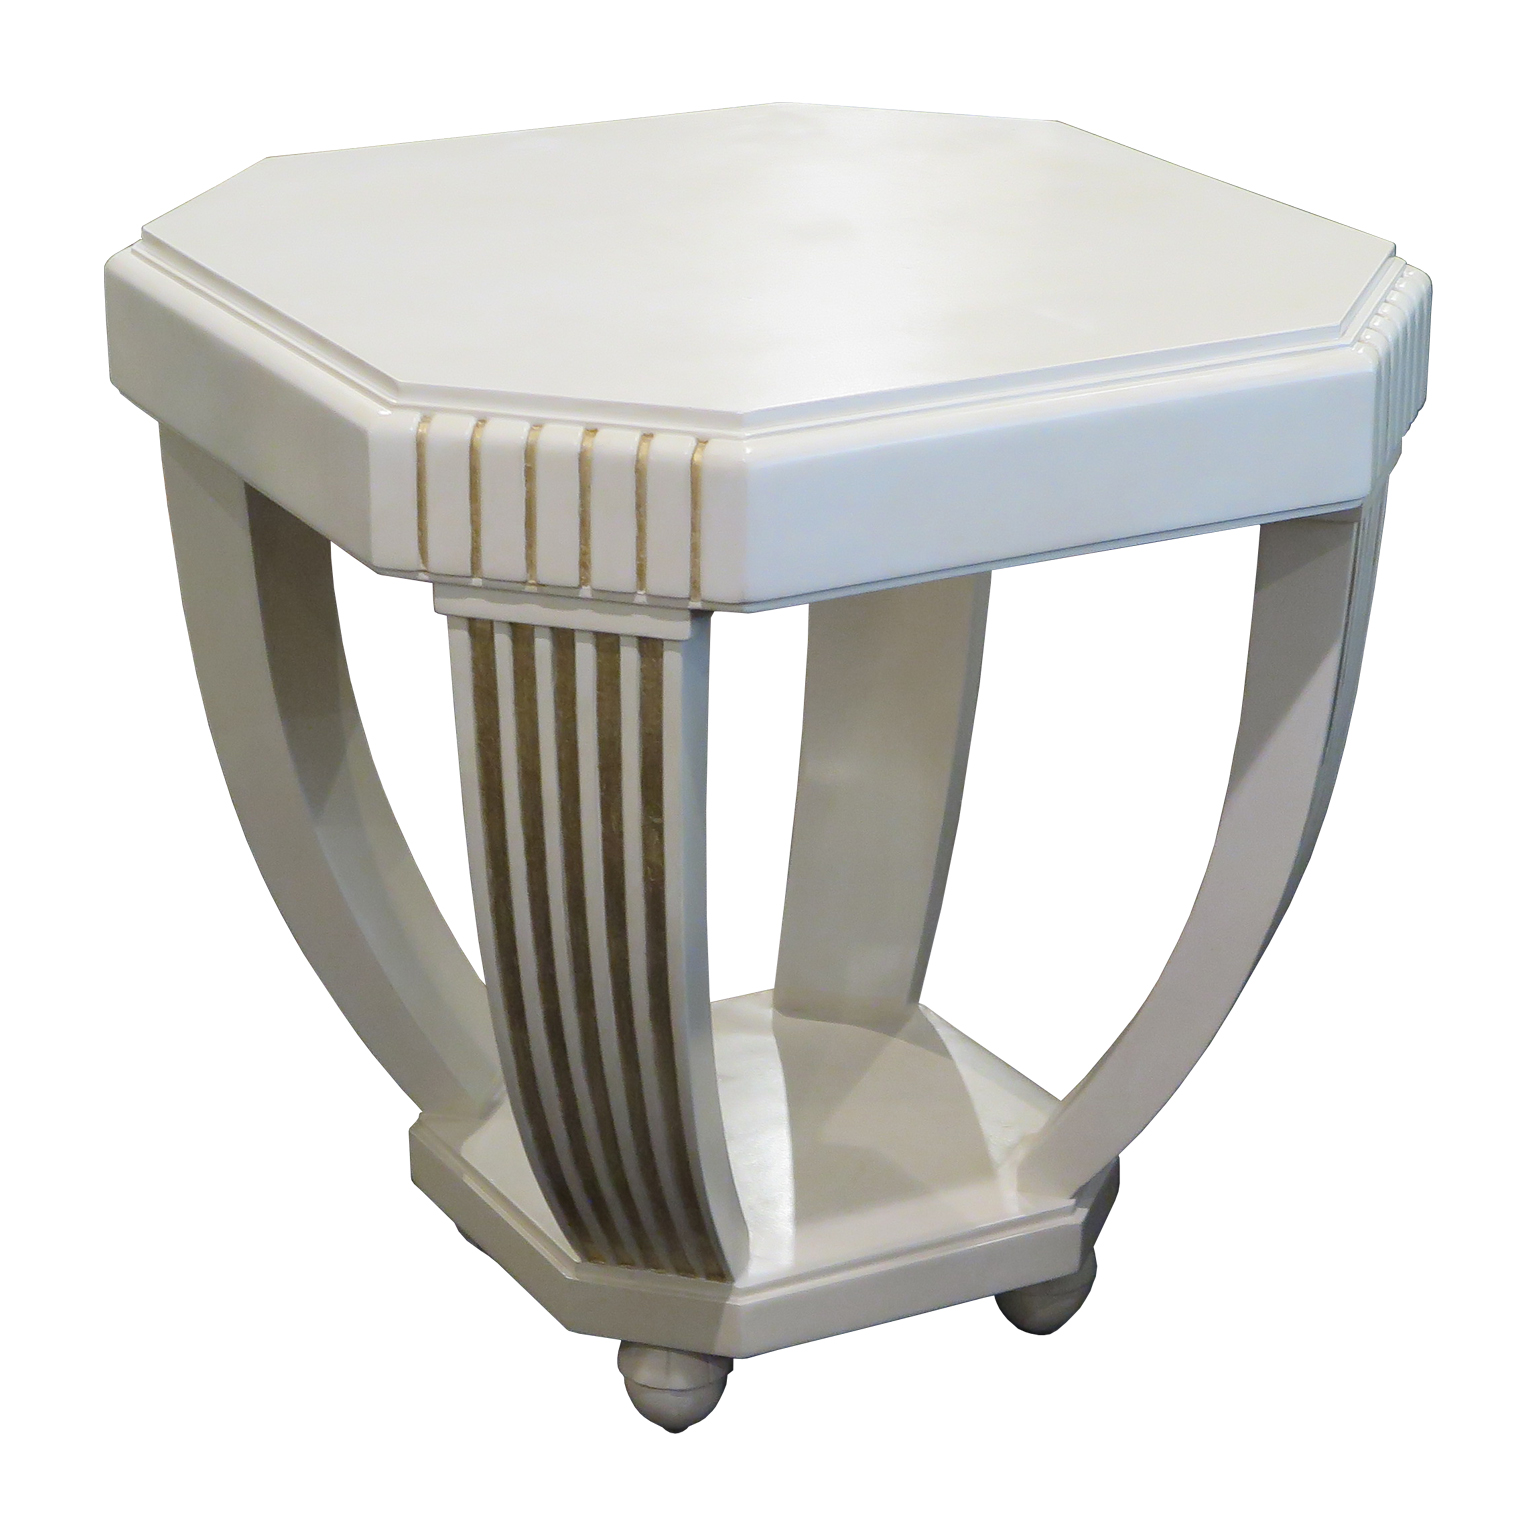 French Art Deco Side table with a ivory lacquer frame and gold leaf details.